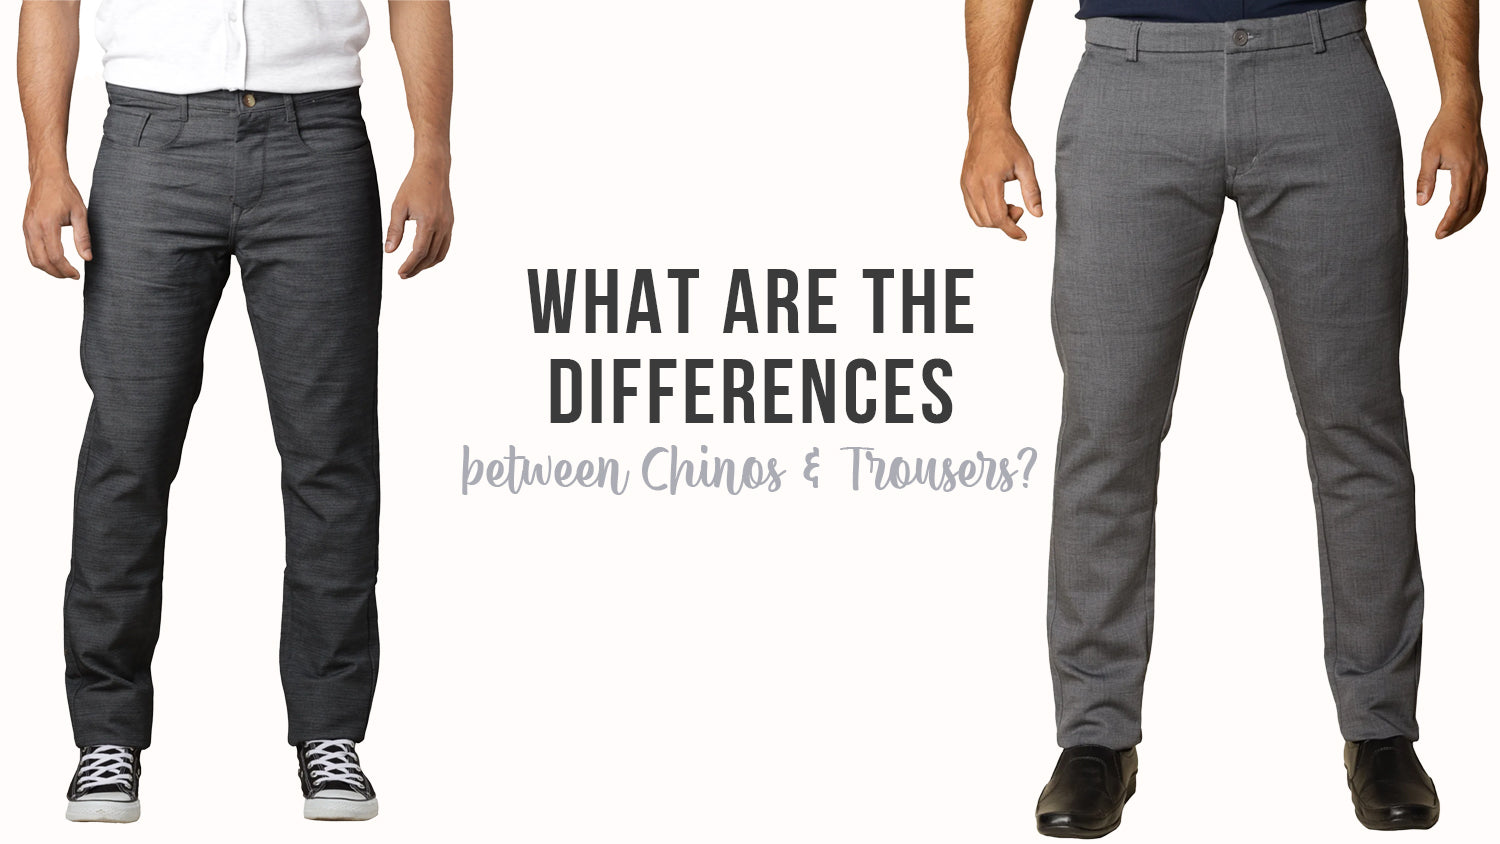 Chinos vs. Jeans, Differences & Advantages